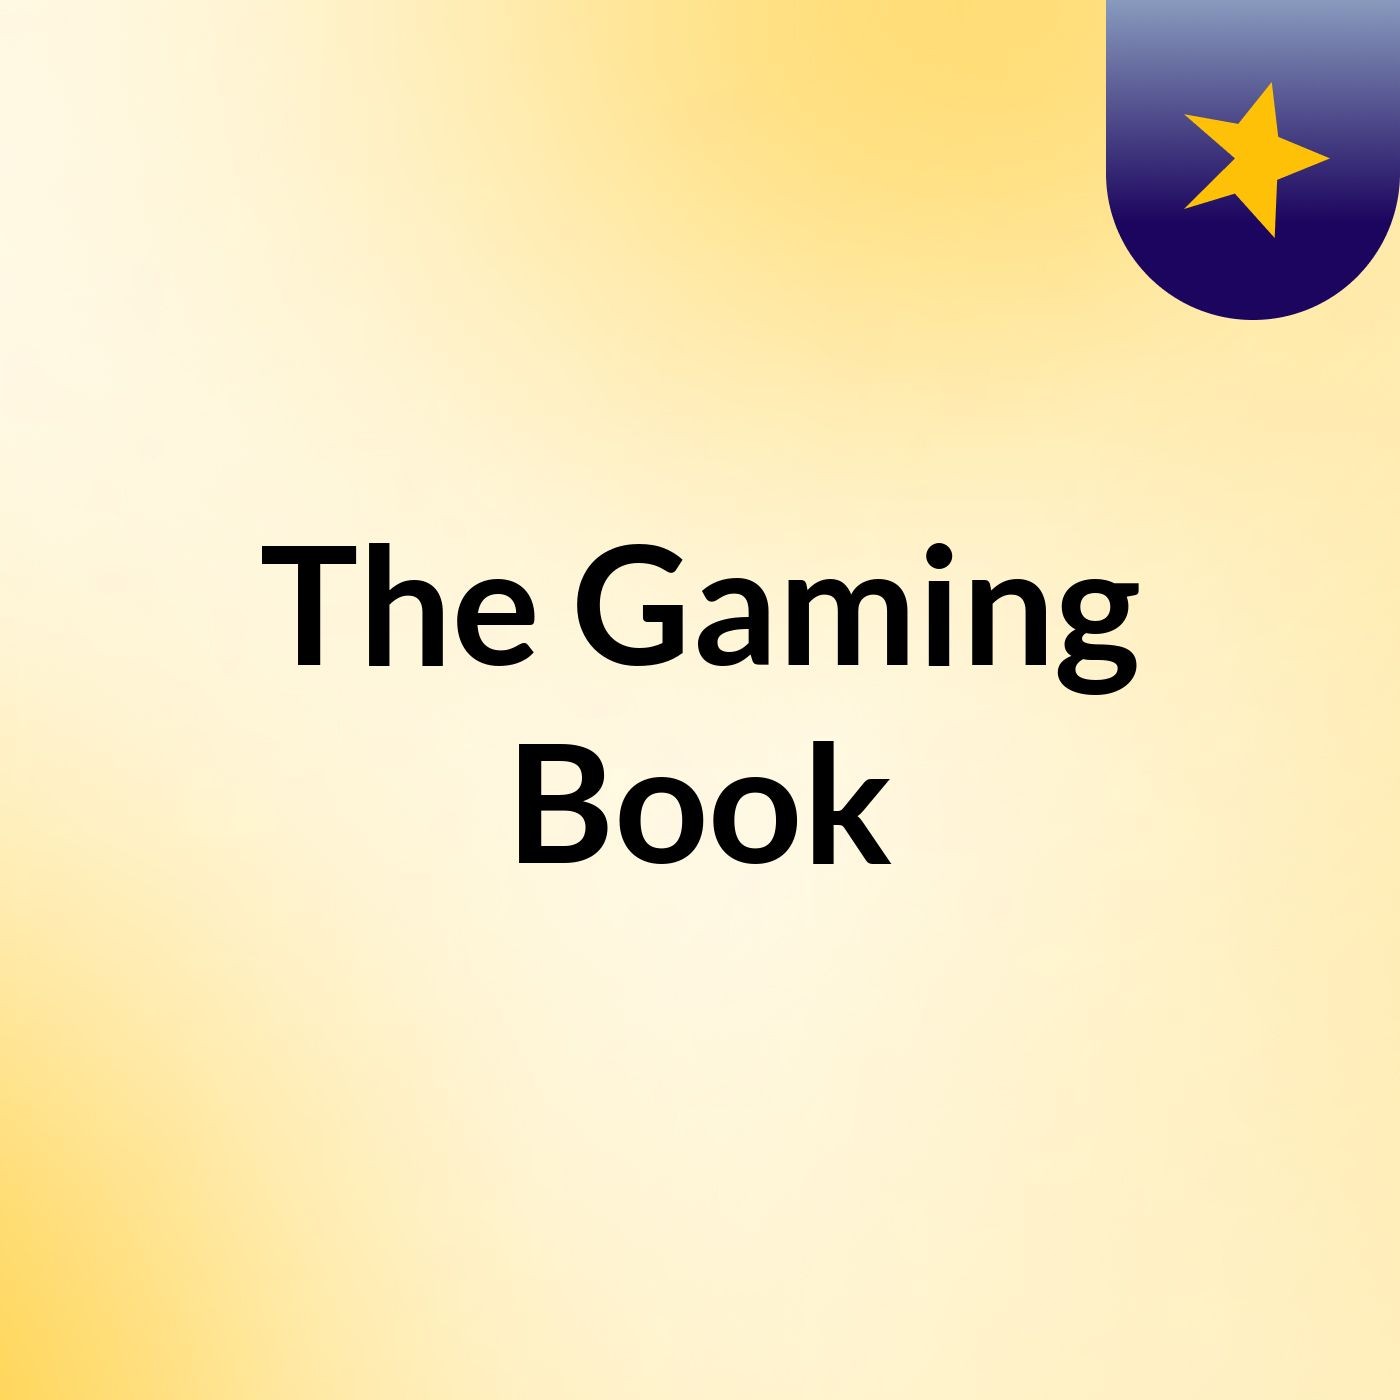 The Gaming Book